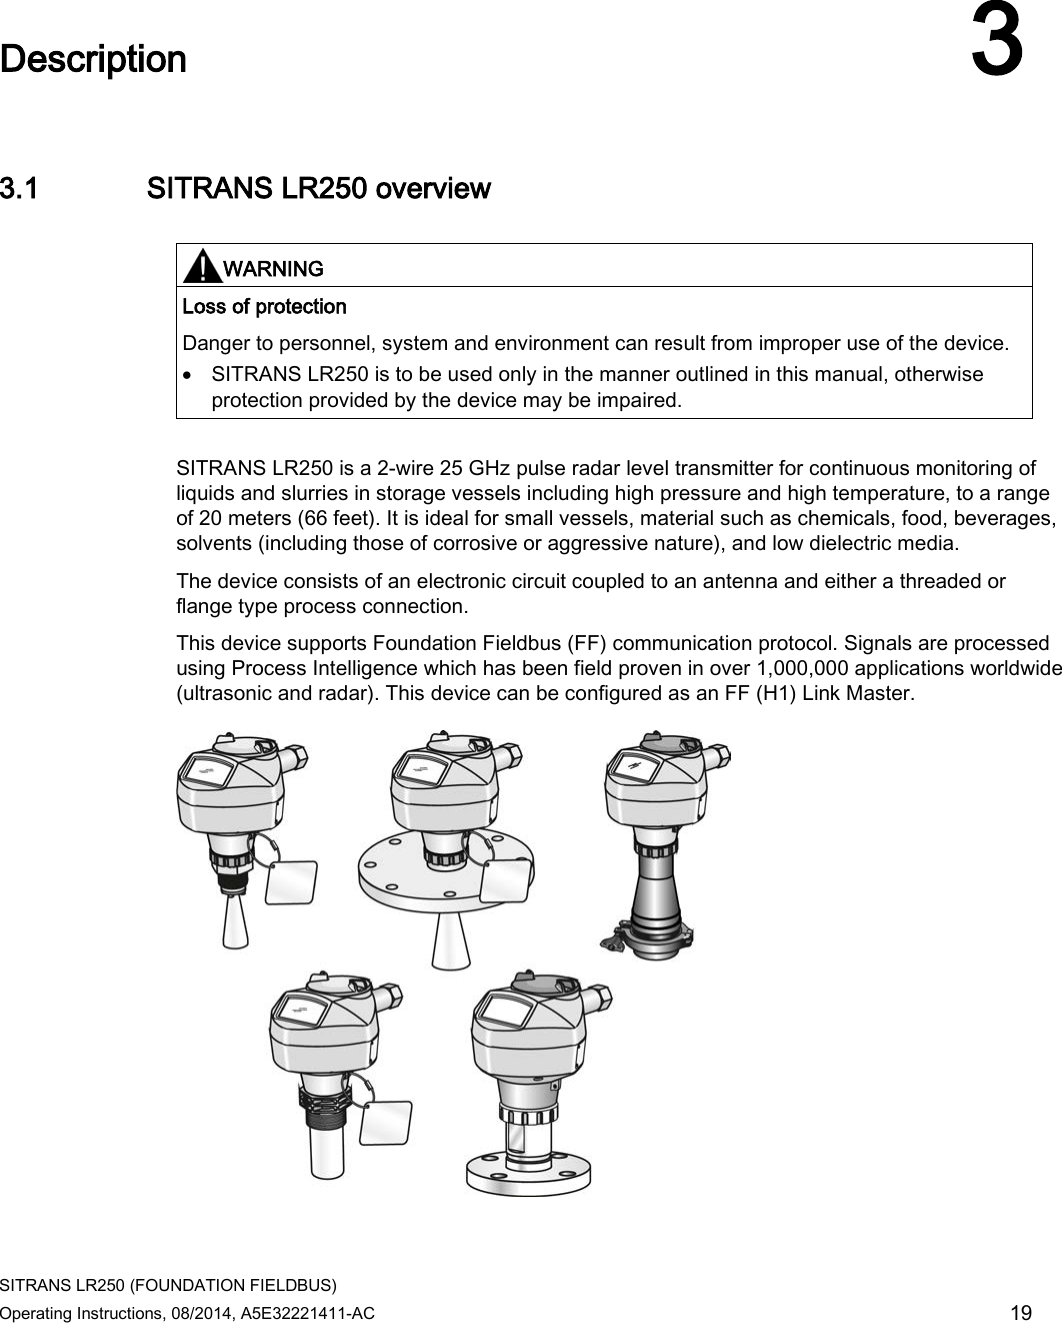  SITRANS LR250 (FOUNDATION FIELDBUS) Operating Instructions, 08/2014, A5E32221411-AC 19  Description 3 3.1 SITRANS LR250 overview   WARNING Loss of protection Danger to personnel, system and environment can result from improper use of the device. • SITRANS LR250 is to be used only in the manner outlined in this manual, otherwise protection provided by the device may be impaired.  SITRANS LR250 is a 2-wire 25 GHz pulse radar level transmitter for continuous monitoring of liquids and slurries in storage vessels including high pressure and high temperature, to a range of 20 meters (66 feet). It is ideal for small vessels, material such as chemicals, food, beverages, solvents (including those of corrosive or aggressive nature), and low dielectric media.  The device consists of an electronic circuit coupled to an antenna and either a threaded or flange type process connection. This device supports Foundation Fieldbus (FF) communication protocol. Signals are processed using Process Intelligence which has been field proven in over 1,000,000 applications worldwide (ultrasonic and radar). This device can be configured as an FF (H1) Link Master.  